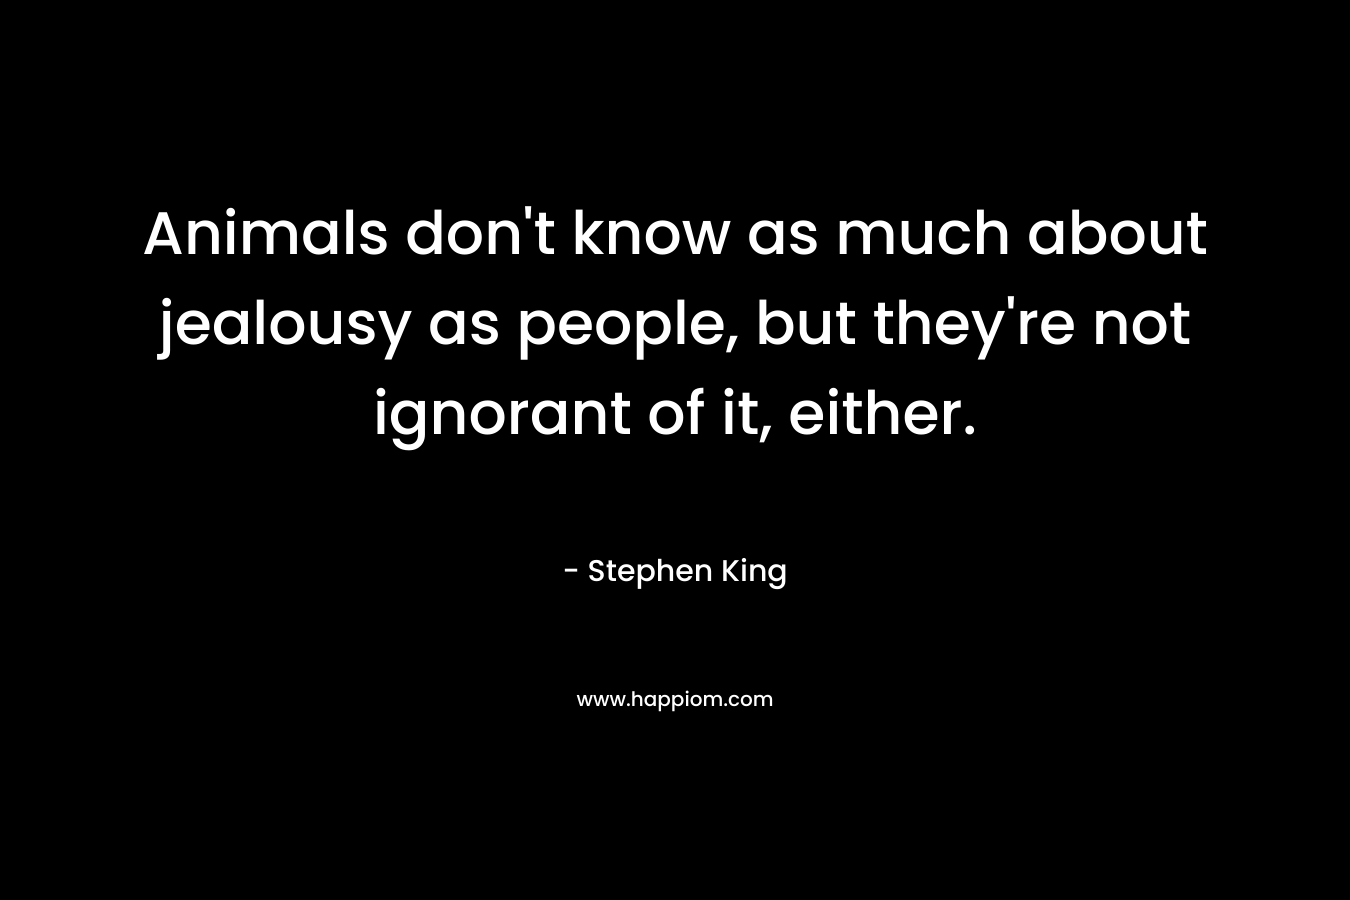 Animals don’t know as much about jealousy as people, but they’re not ignorant of it, either. – Stephen King